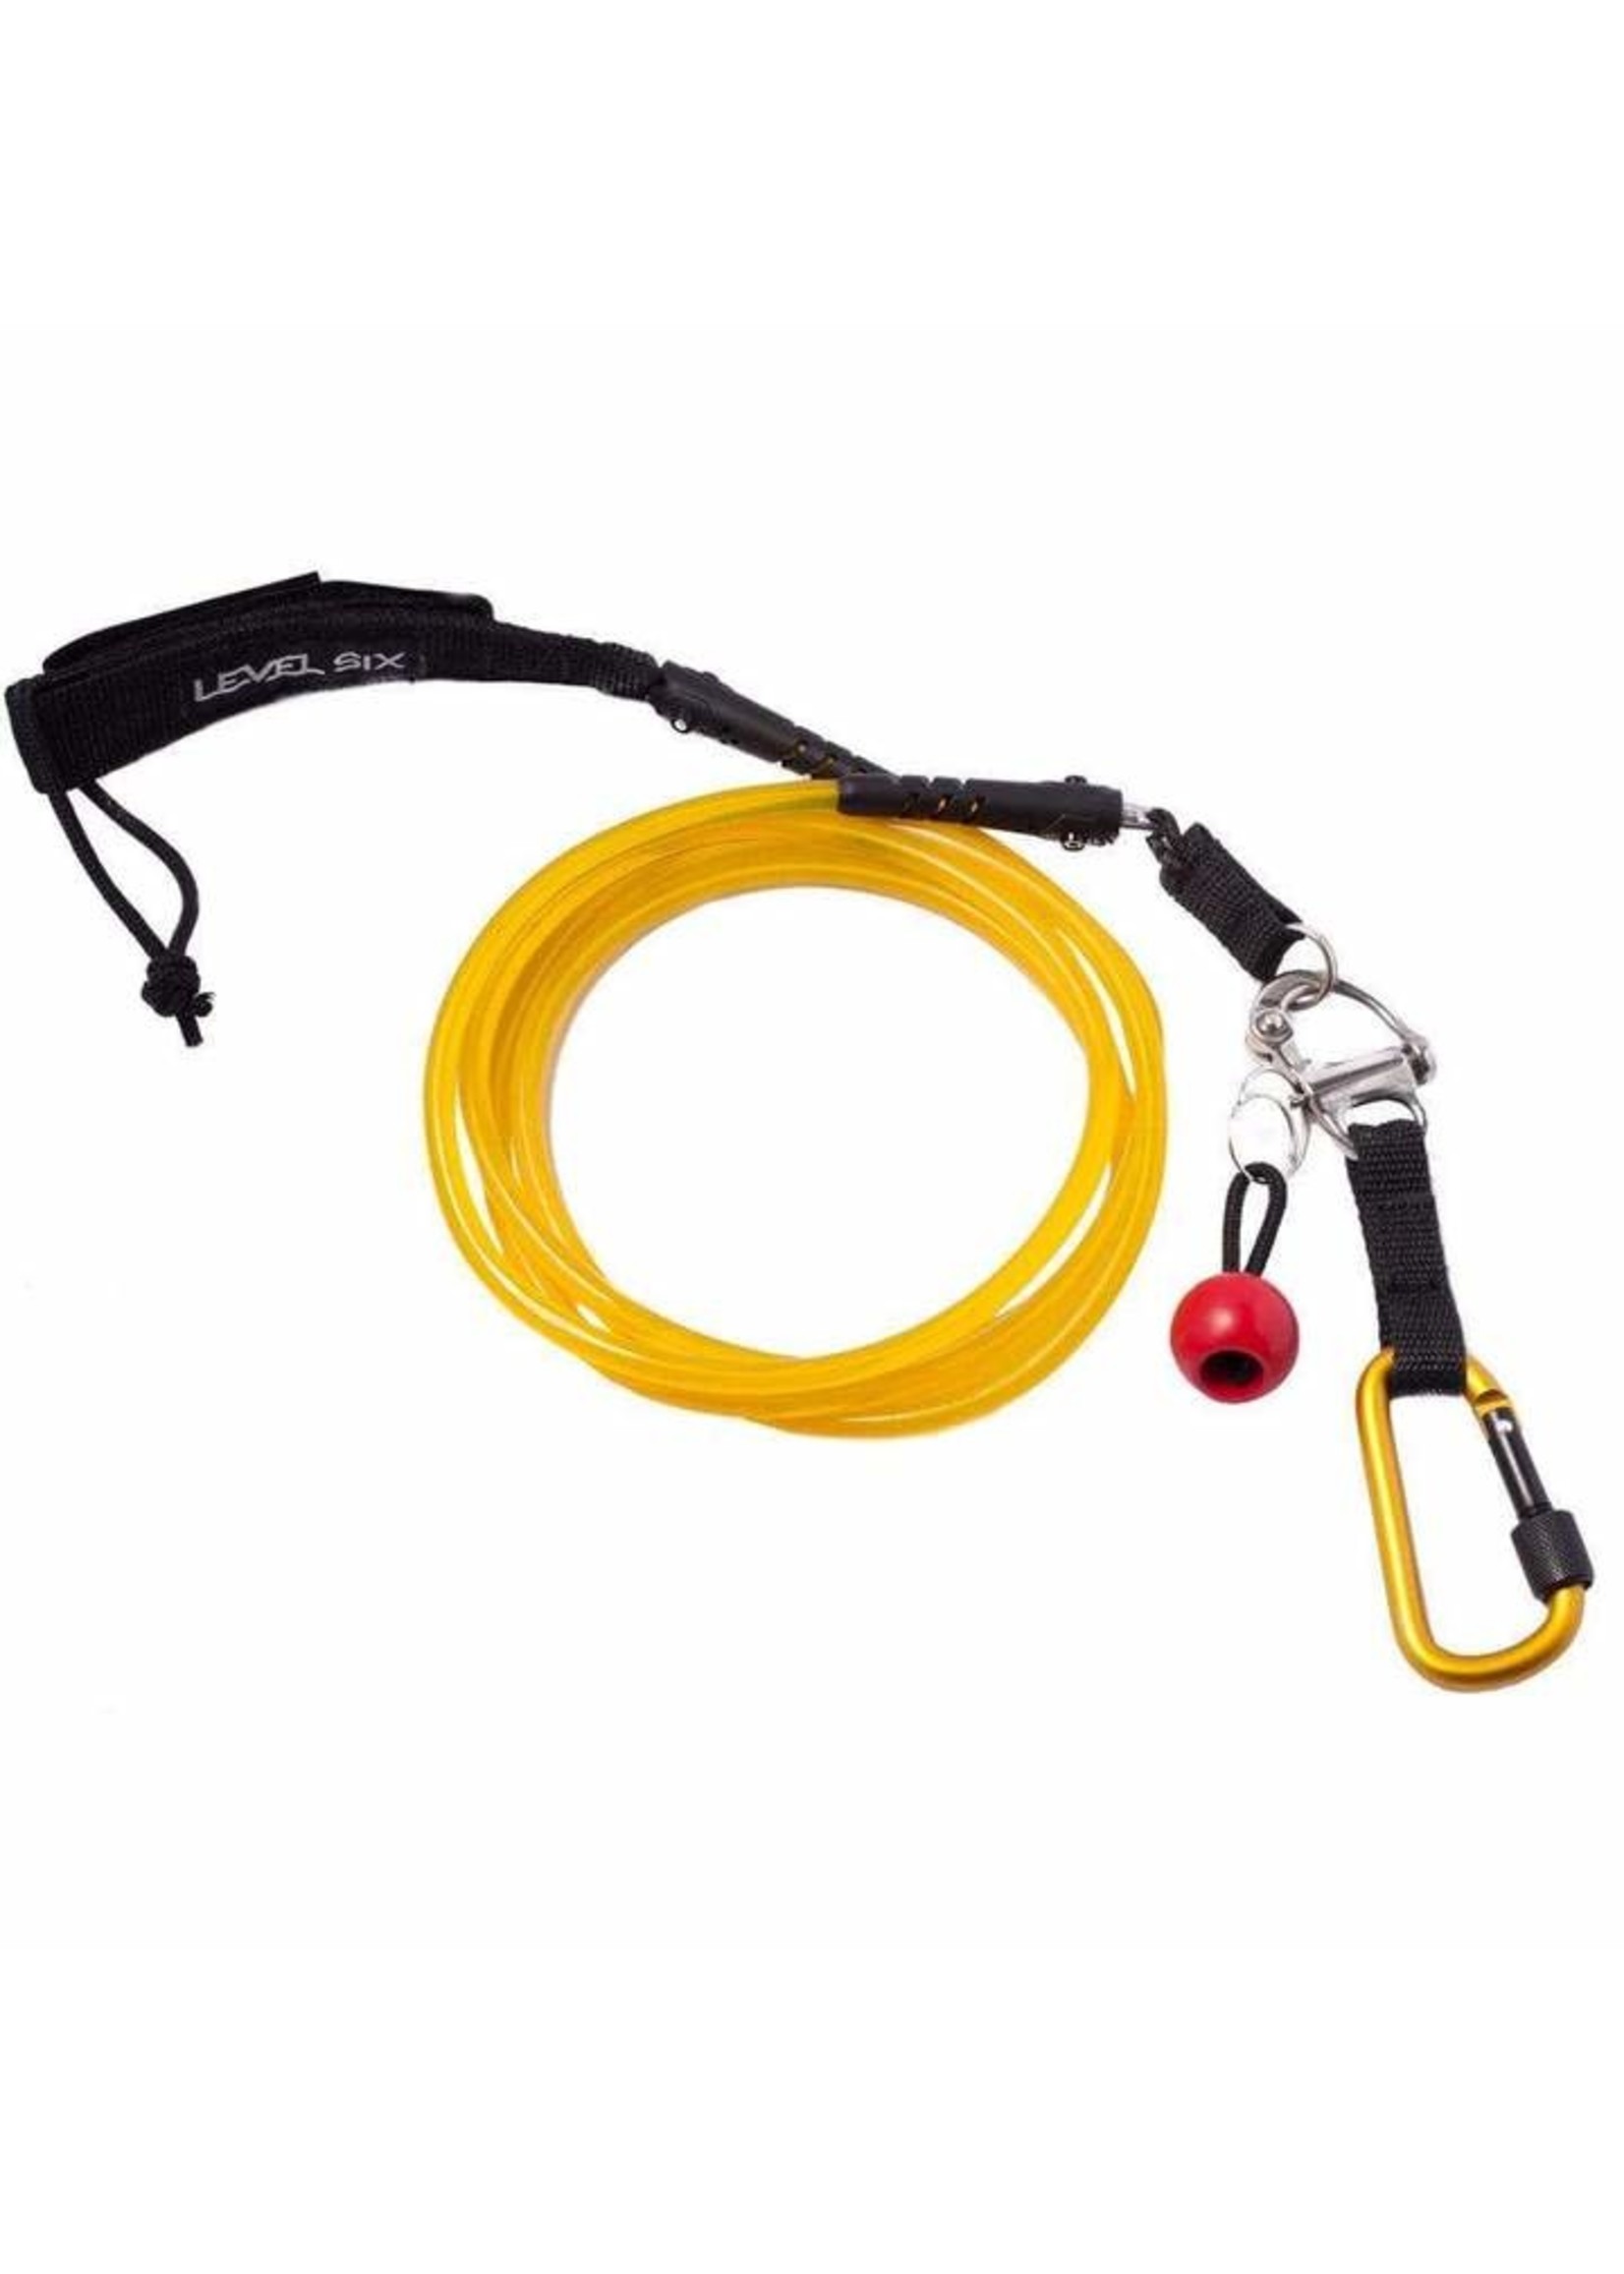 Level Six Level Six Quick Release Sup Leash Straight Yellow